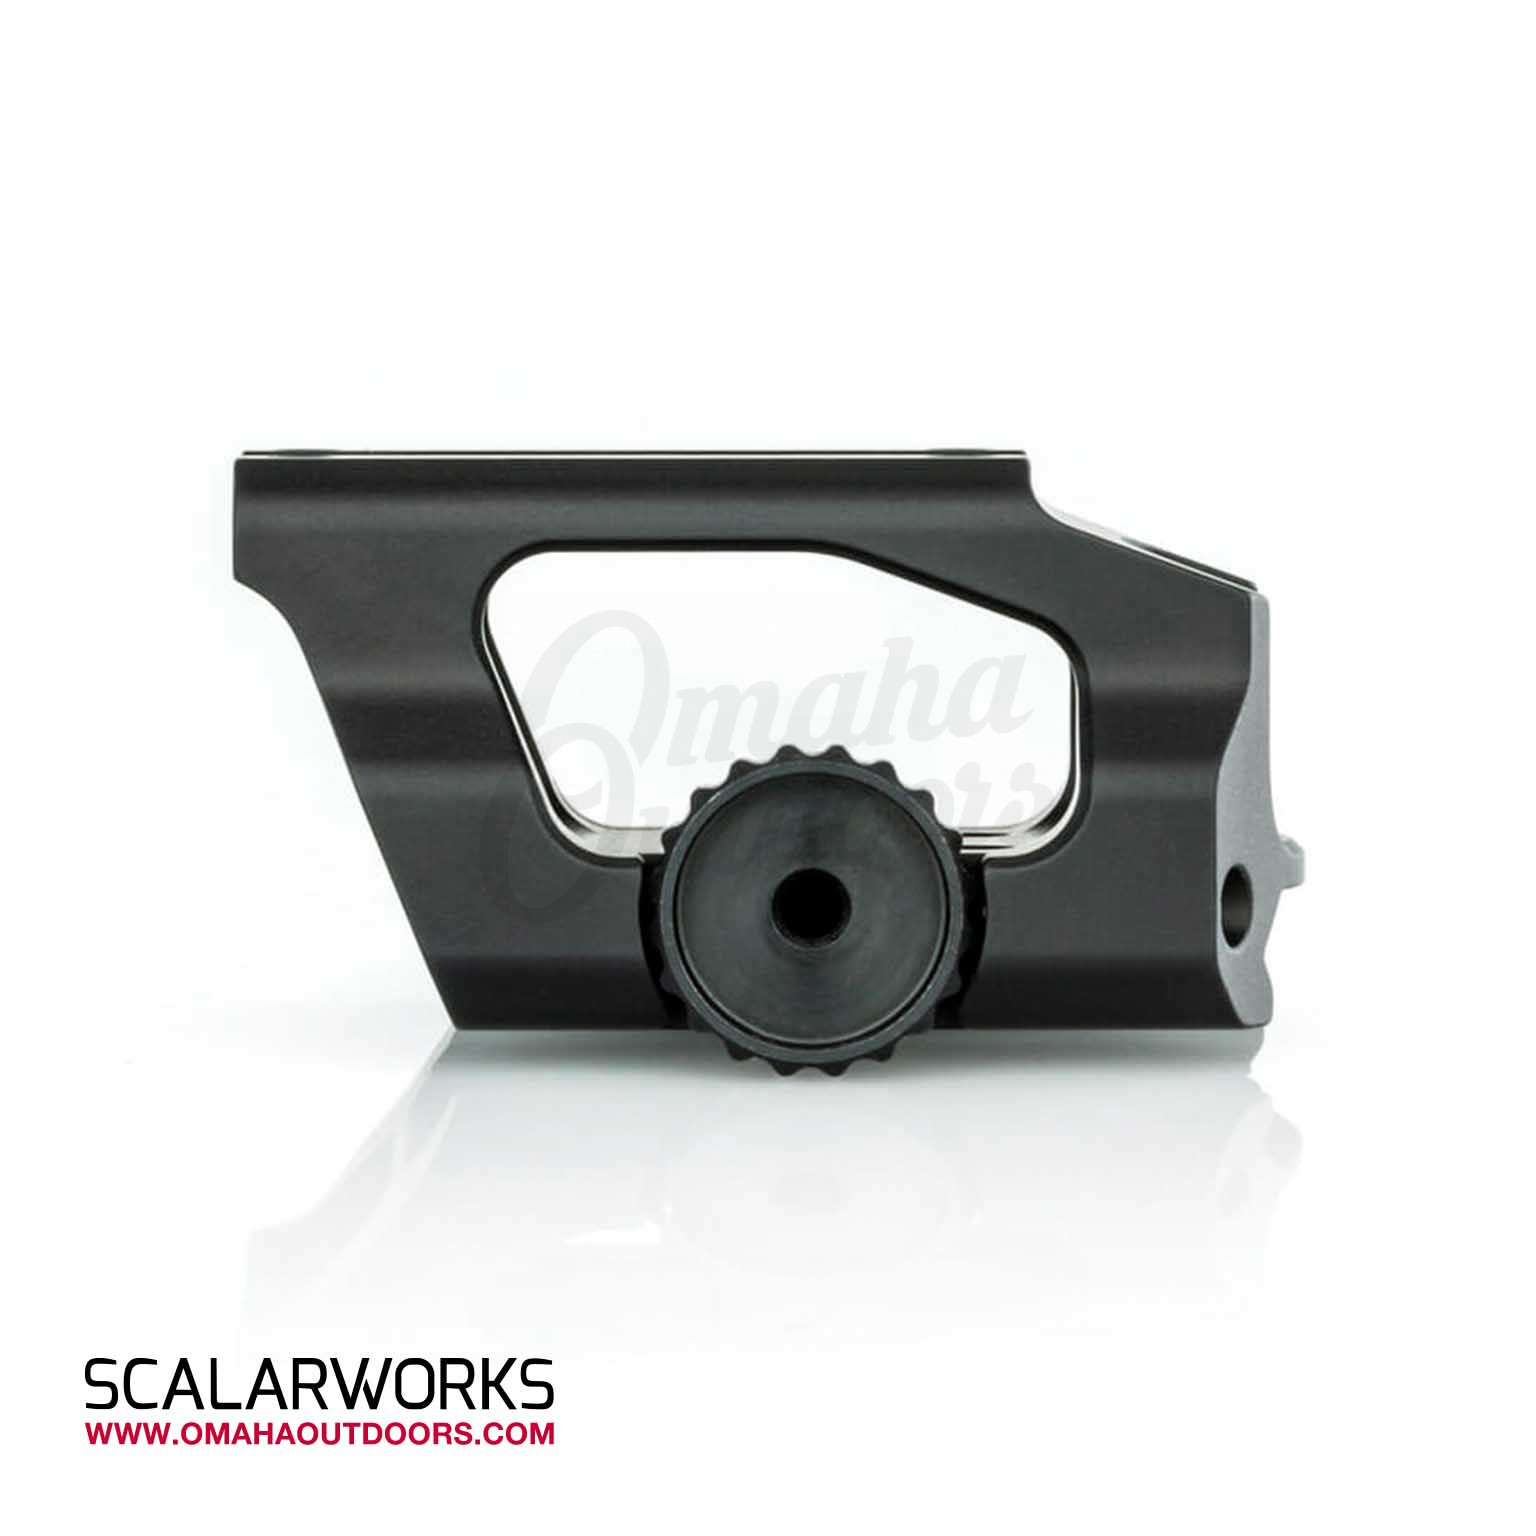 SCALARWORKS LEAP 05 Trijicon MRO Mount 1.57 - Primary Weapons Systems